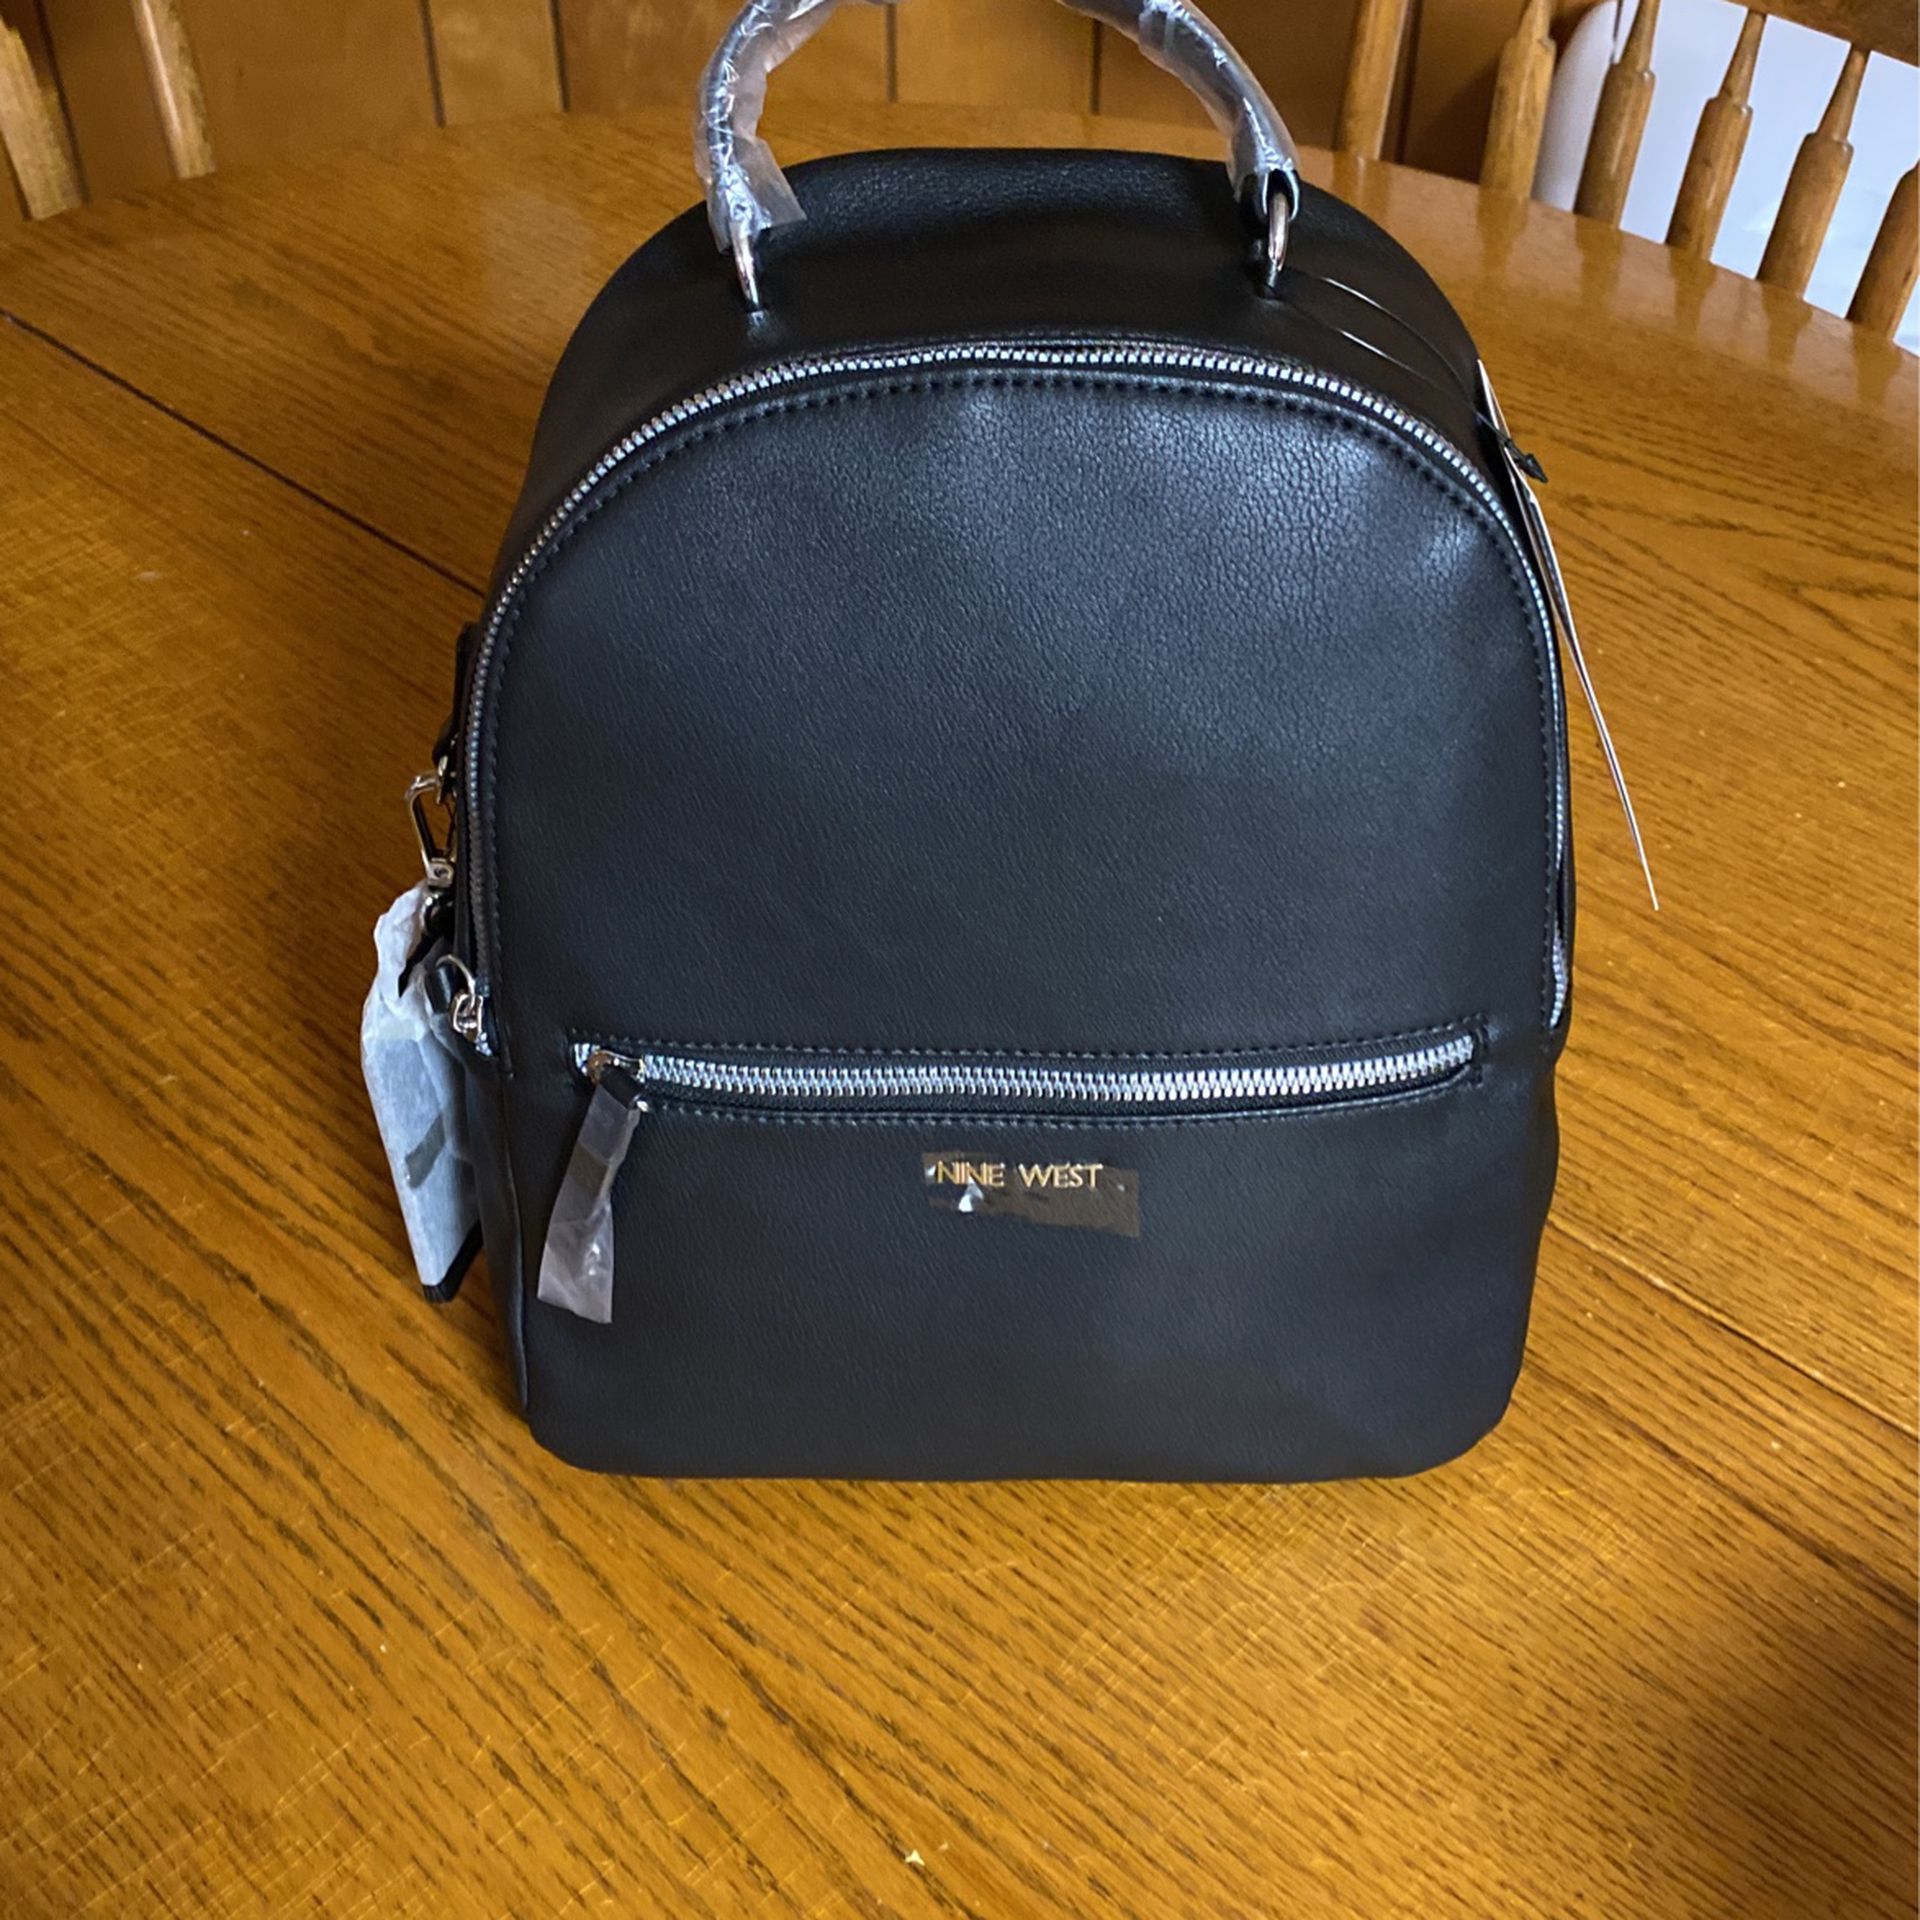 Backpack Nine West New With Tags for Sale in Santee, CA - OfferUp